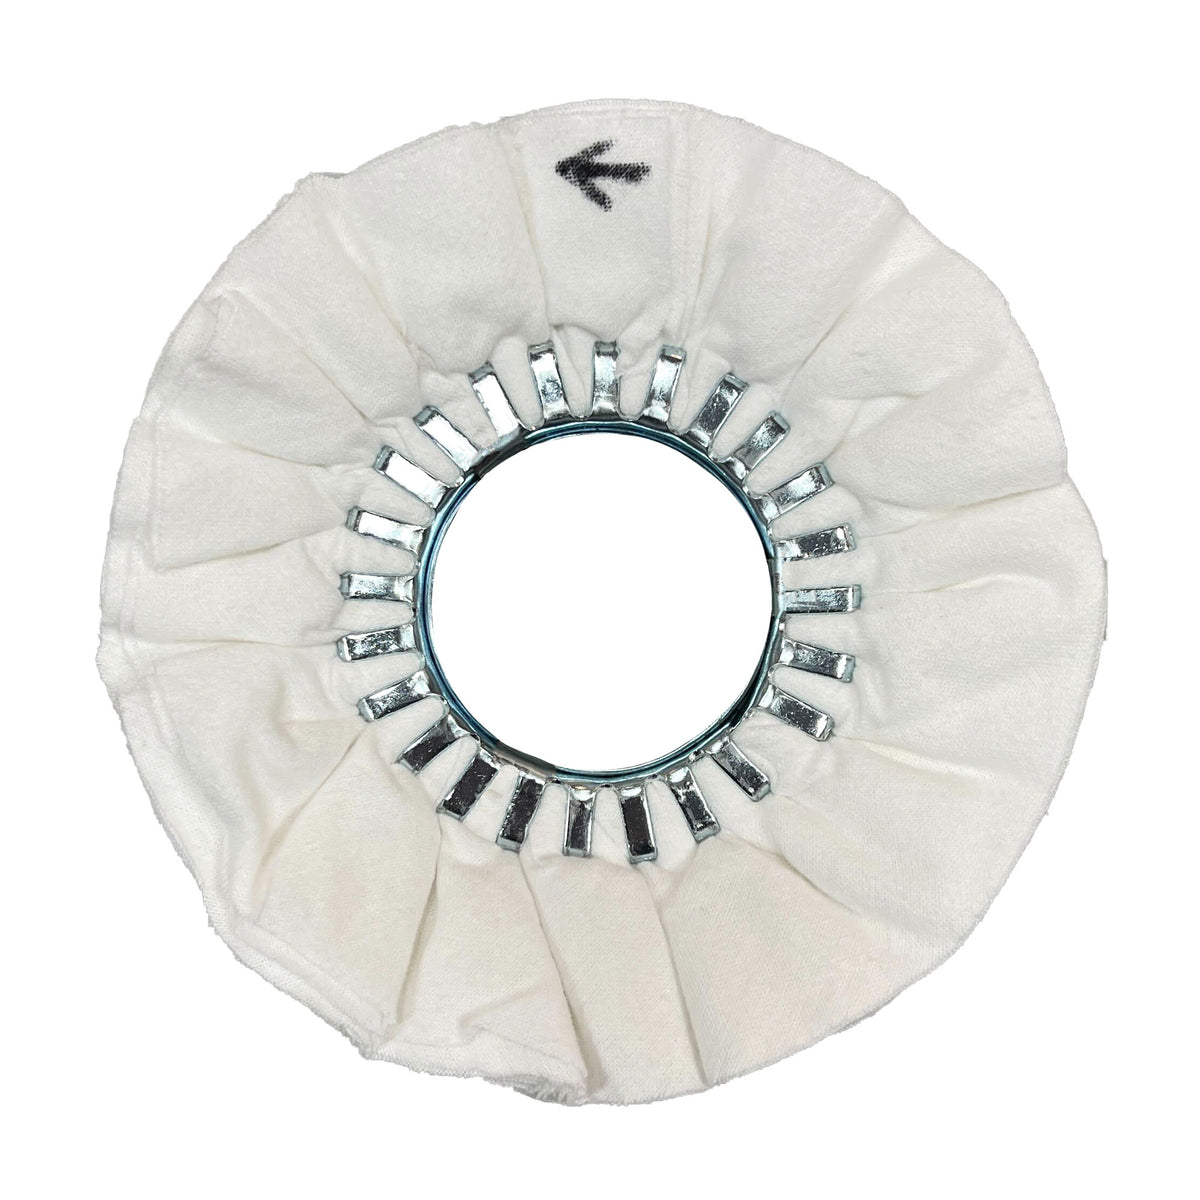 Renegade Products USA Domet Flannel Airway Buffing Wheel - High-Quality Buffing Tool for Smooth and Flawless Polishing